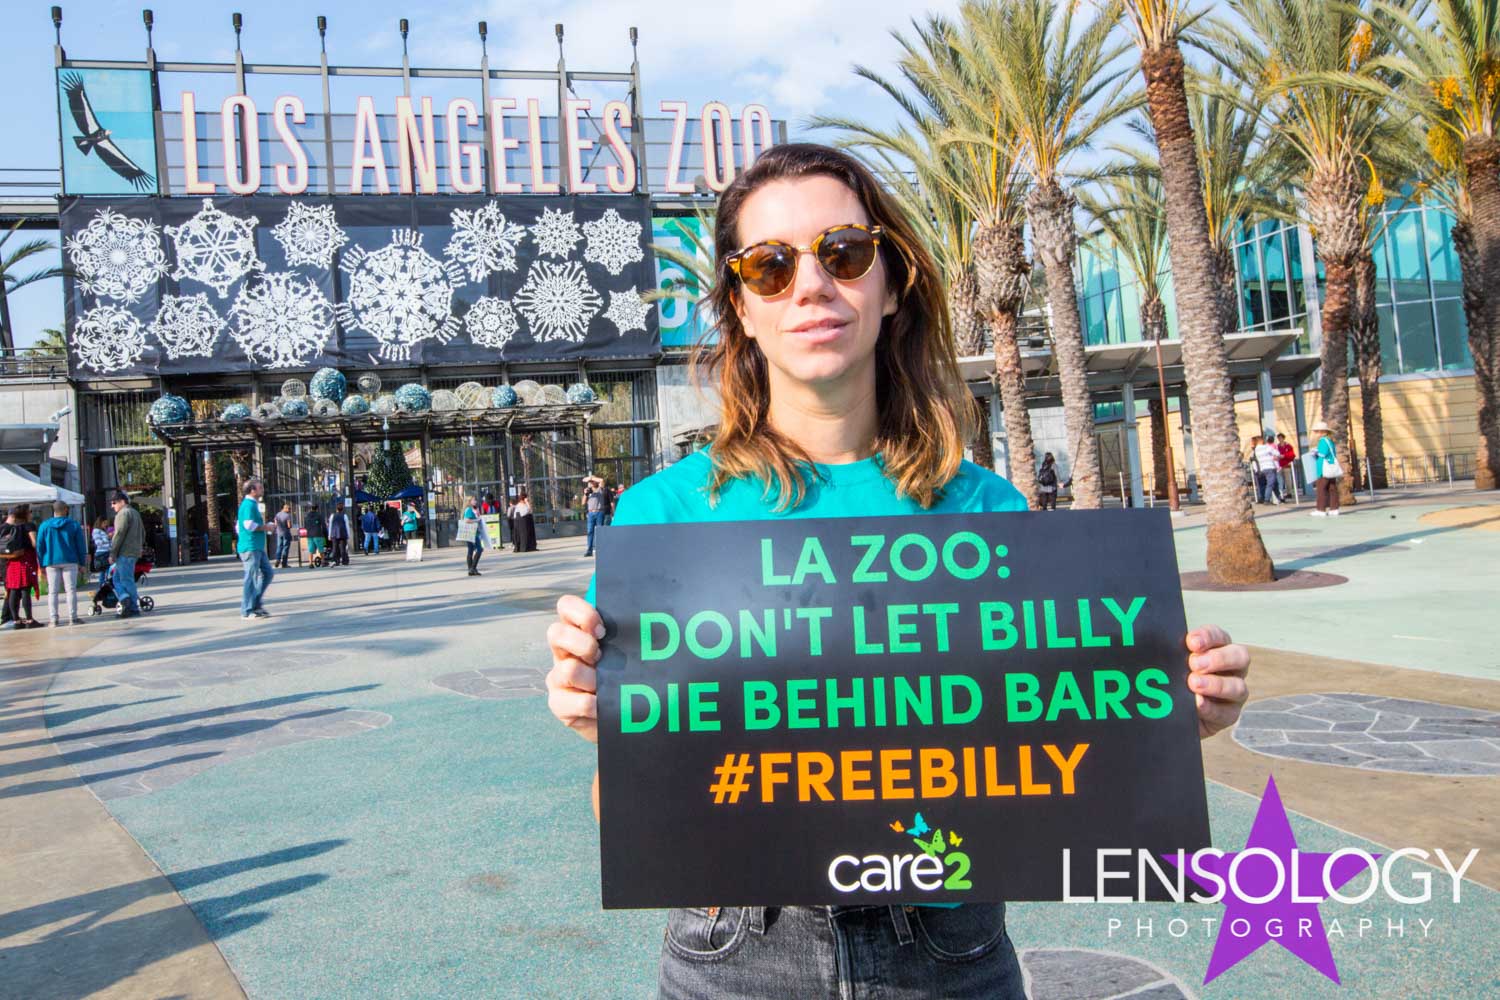 LENSOLOGY.NET - Care2 LA Zoo protest to free Billy The Elephant, LA, CA.
All images are copyright of Lensology.net
Email: info@lensology.net
www.lensology.net